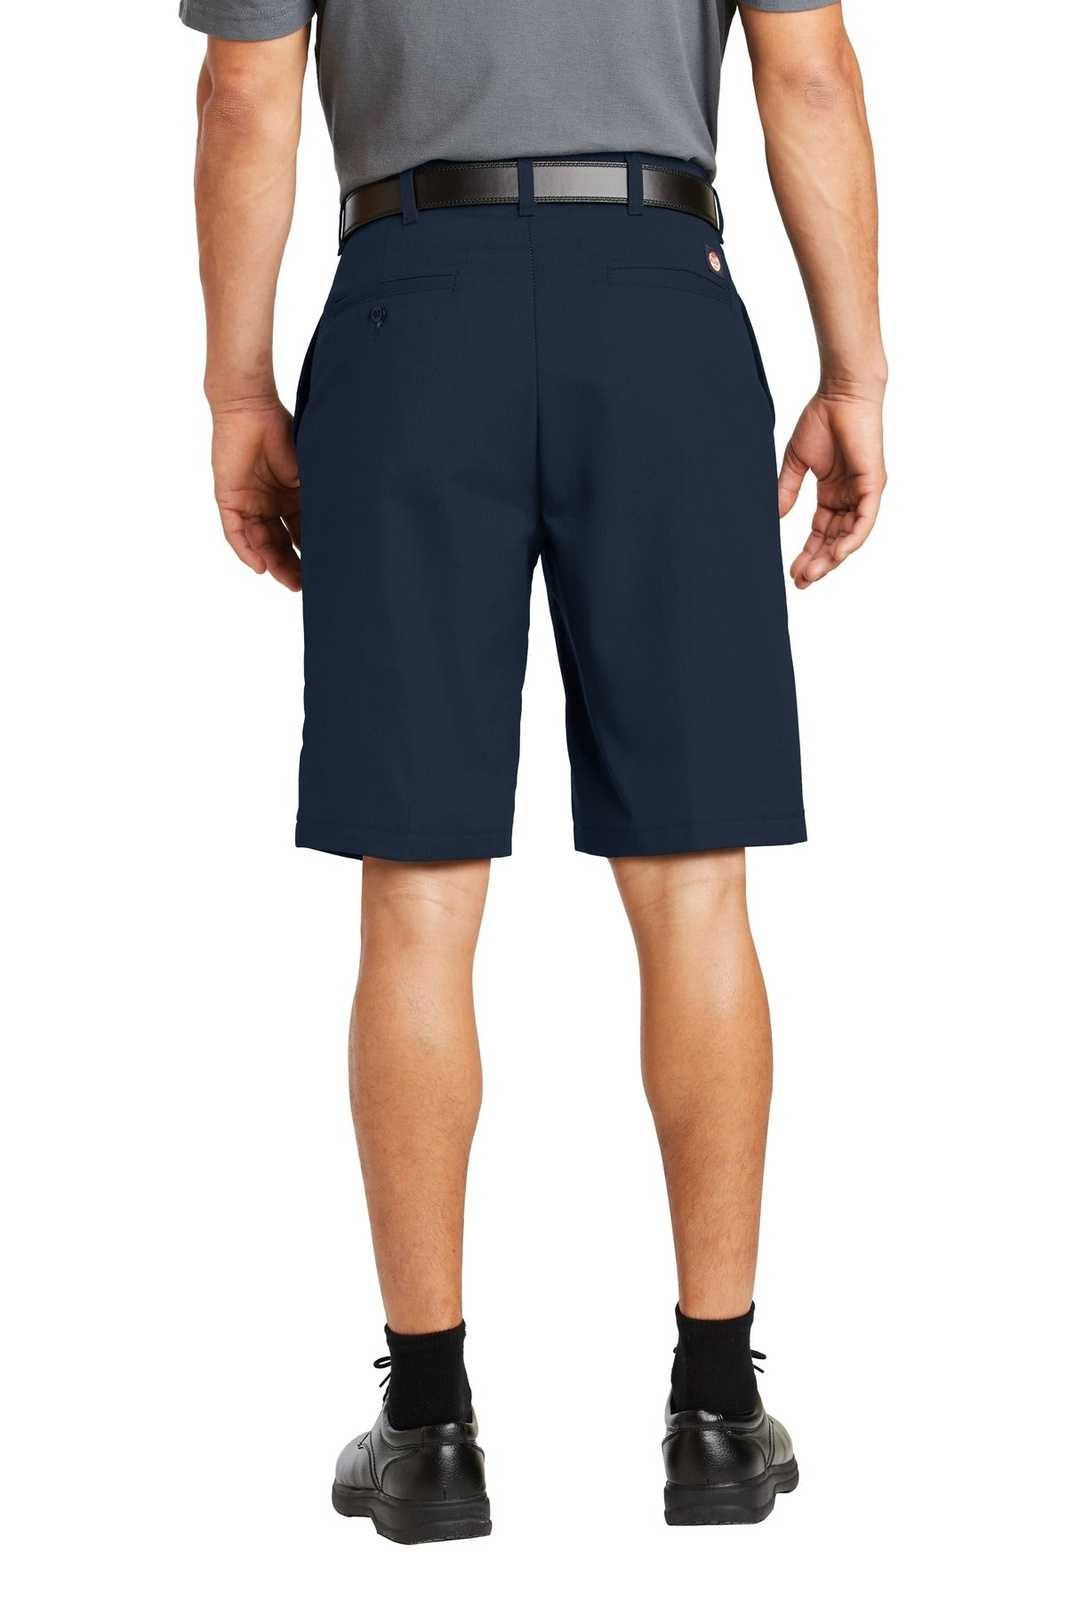 Red Kap PT26 Industrial Work Short - Navy - HIT a Double - 1